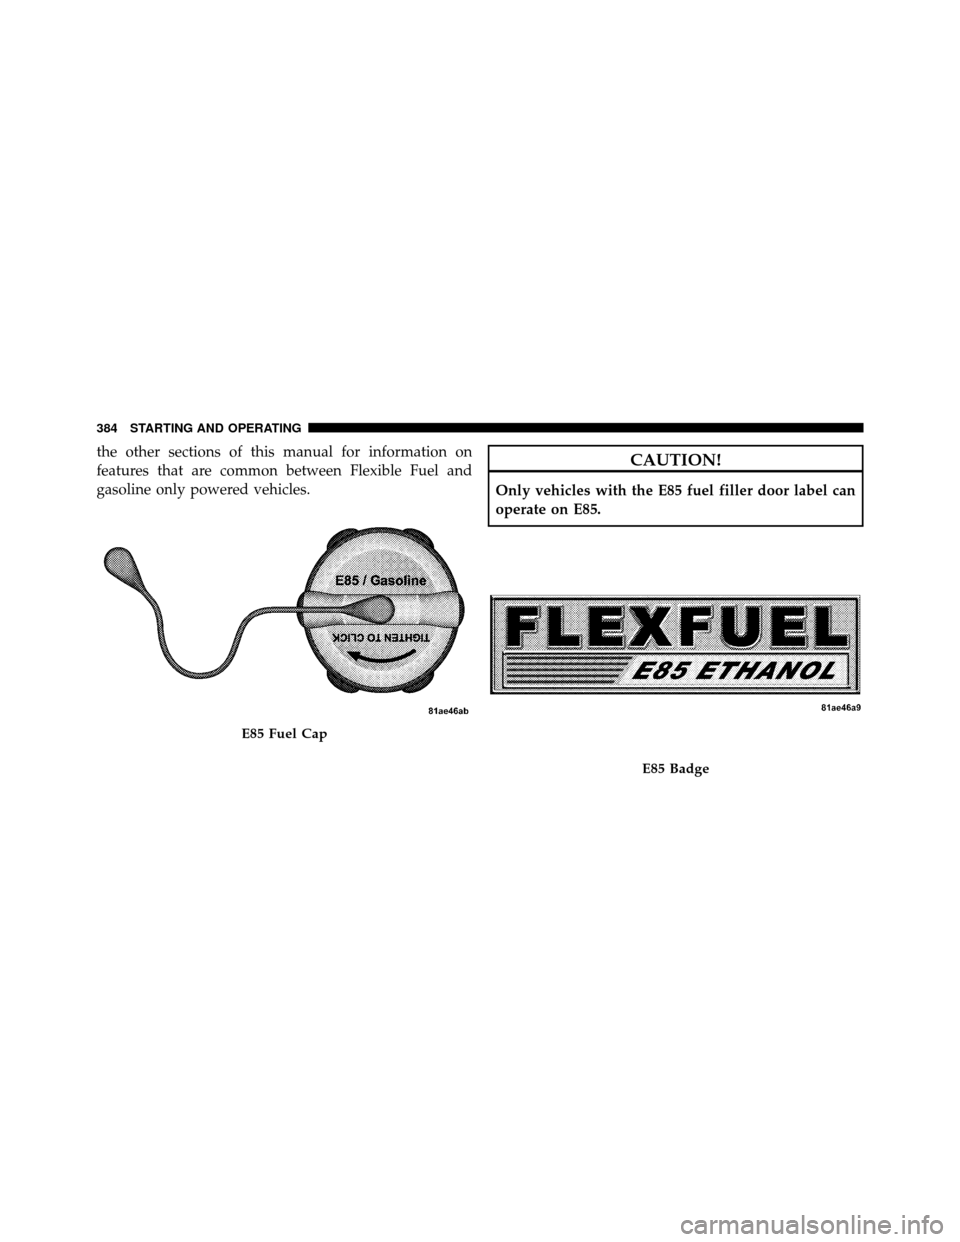 CHRYSLER TOWN AND COUNTRY 2010 5.G Owners Manual the other sections of this manual for information on
features that are common between Flexible Fuel and
gasoline only powered vehicles.CAUTION!
Only vehicles with the E85 fuel filler door label can
op